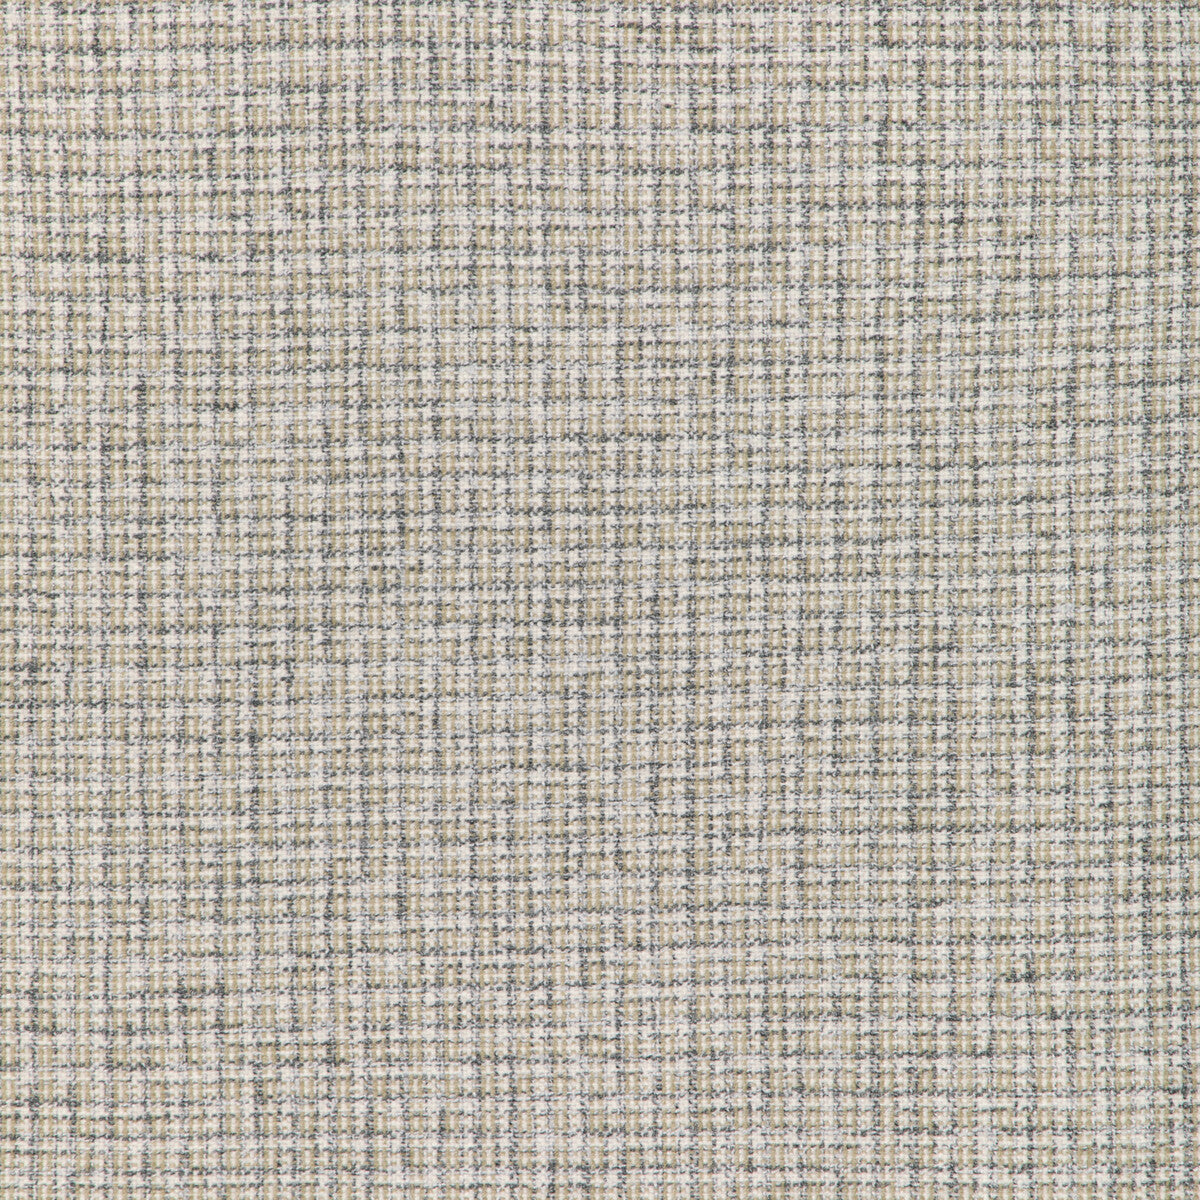 Aria Check fabric in linen color - pattern 36950.1611.0 - by Kravet Basics in the Mid-Century Modern collection